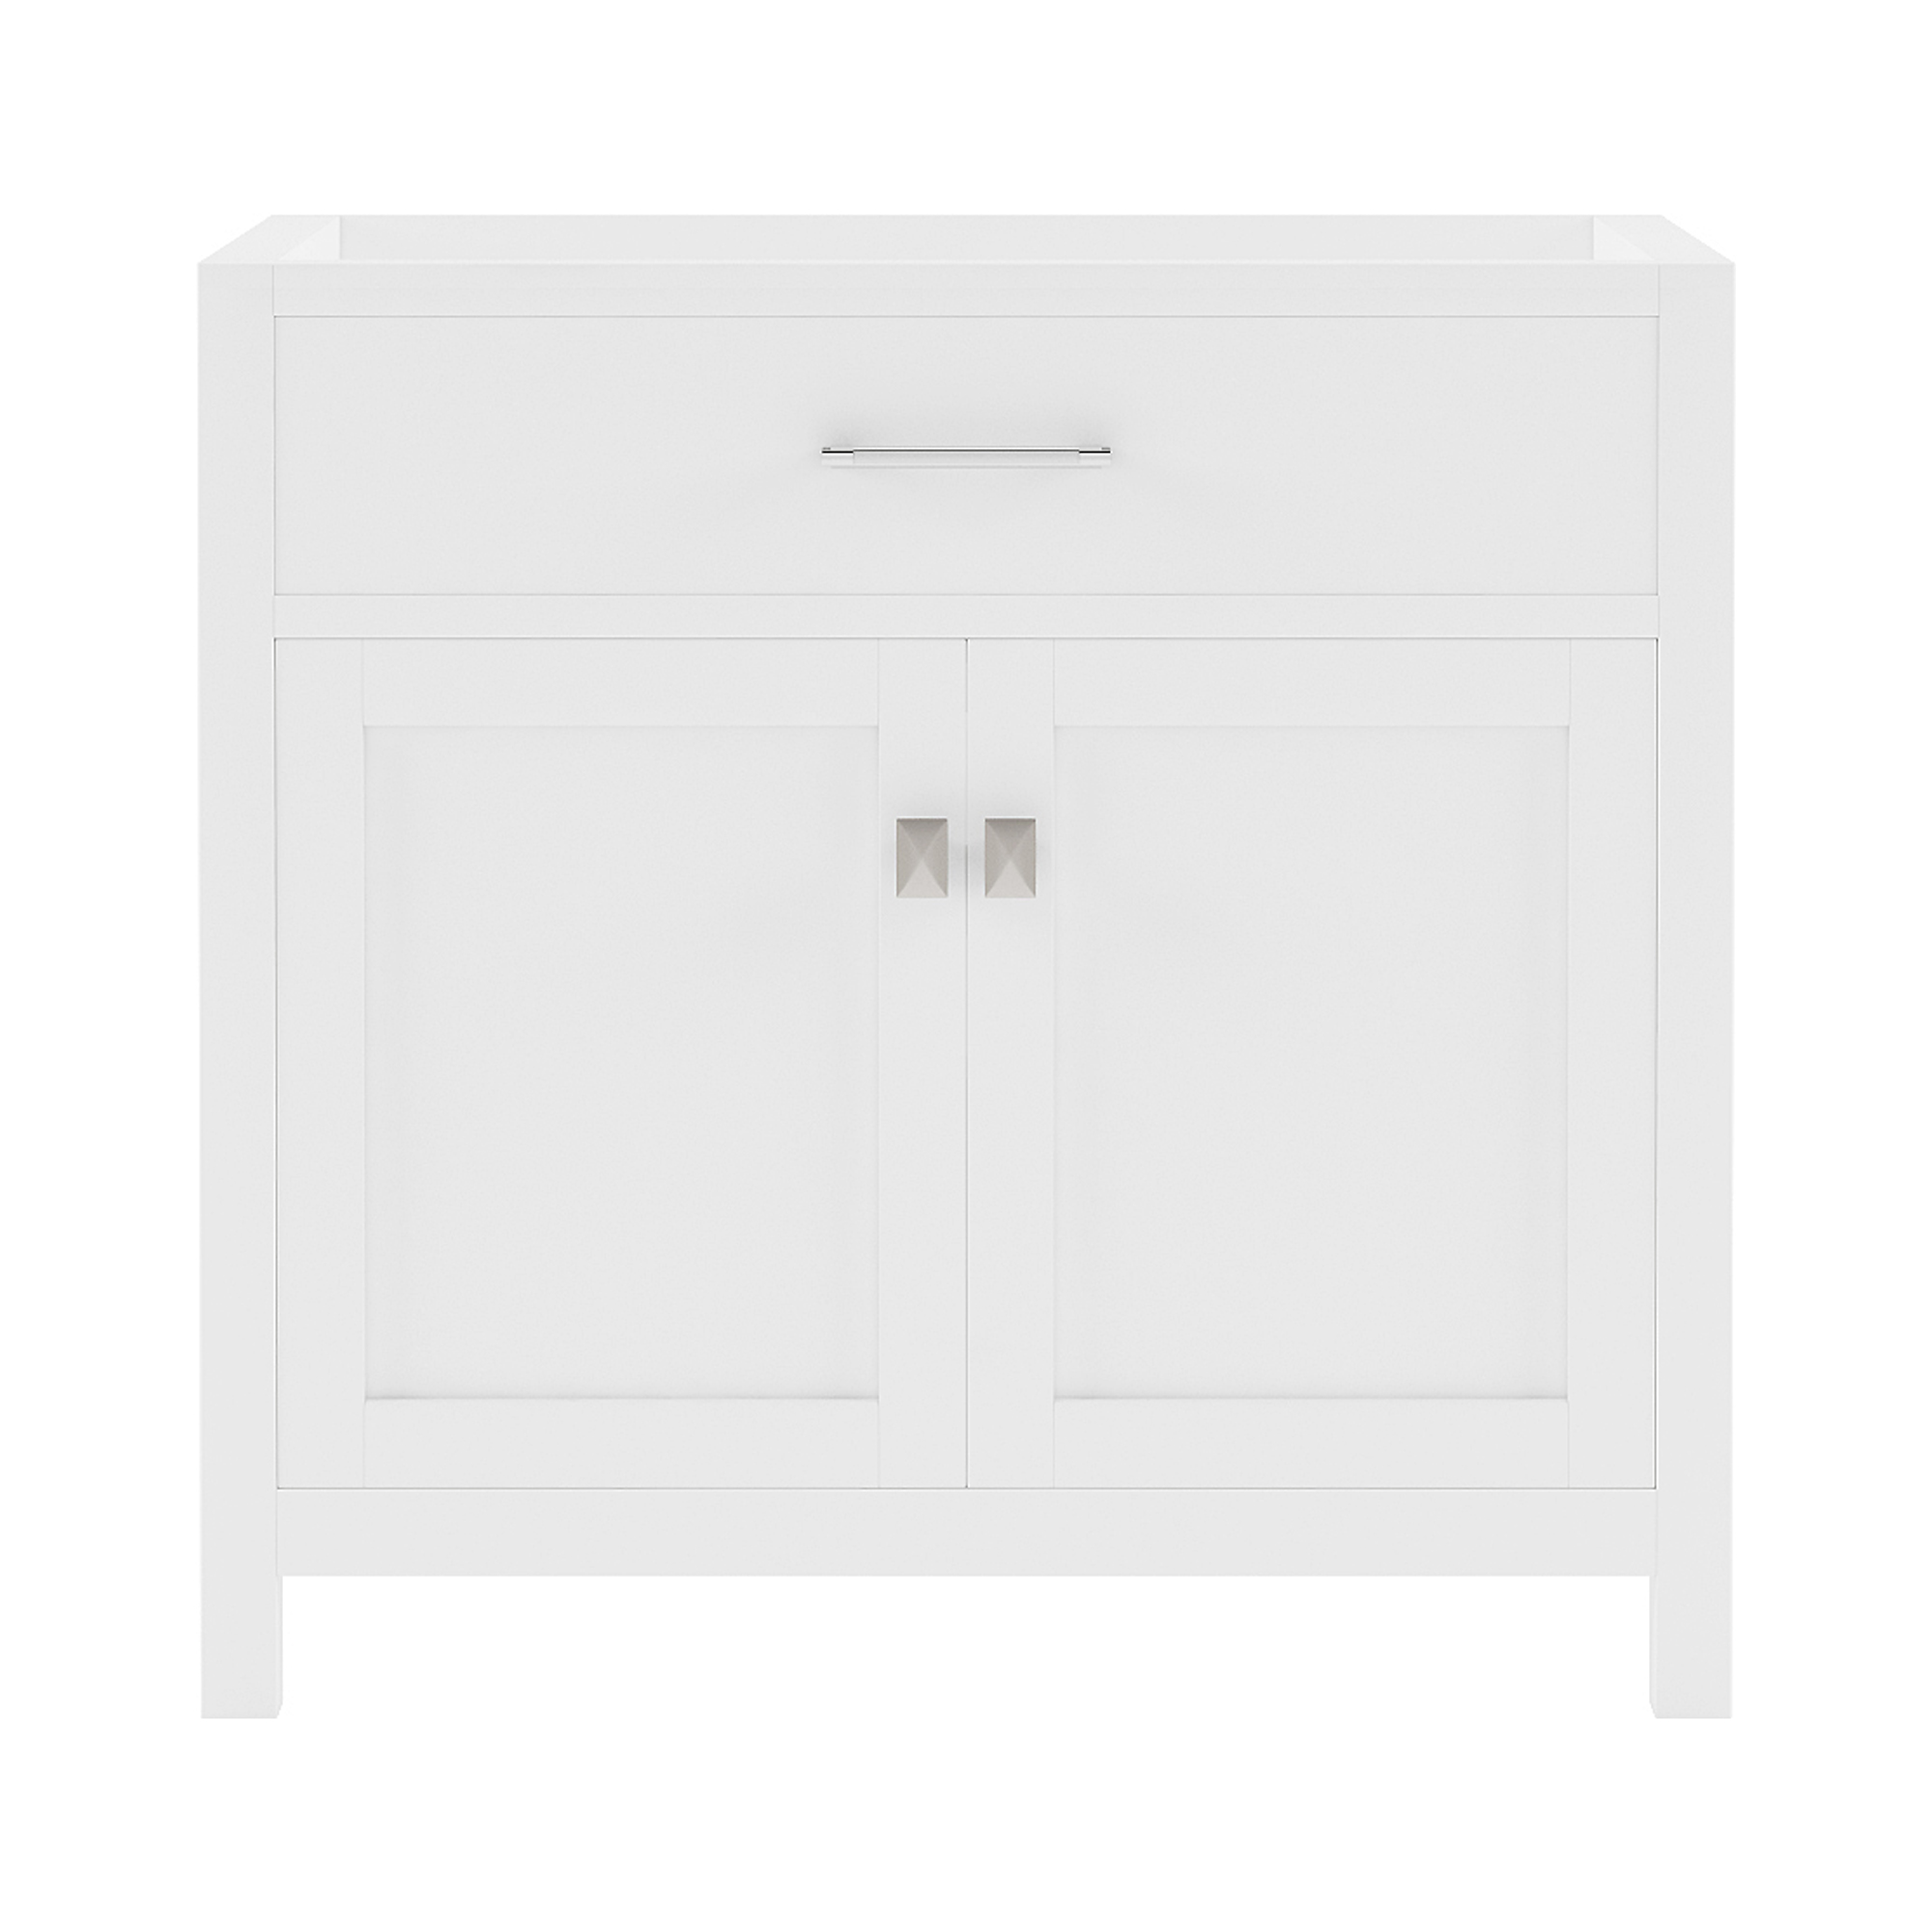 Issac Edwards Collection 36" Single Cabinet  White with 4 Top Options